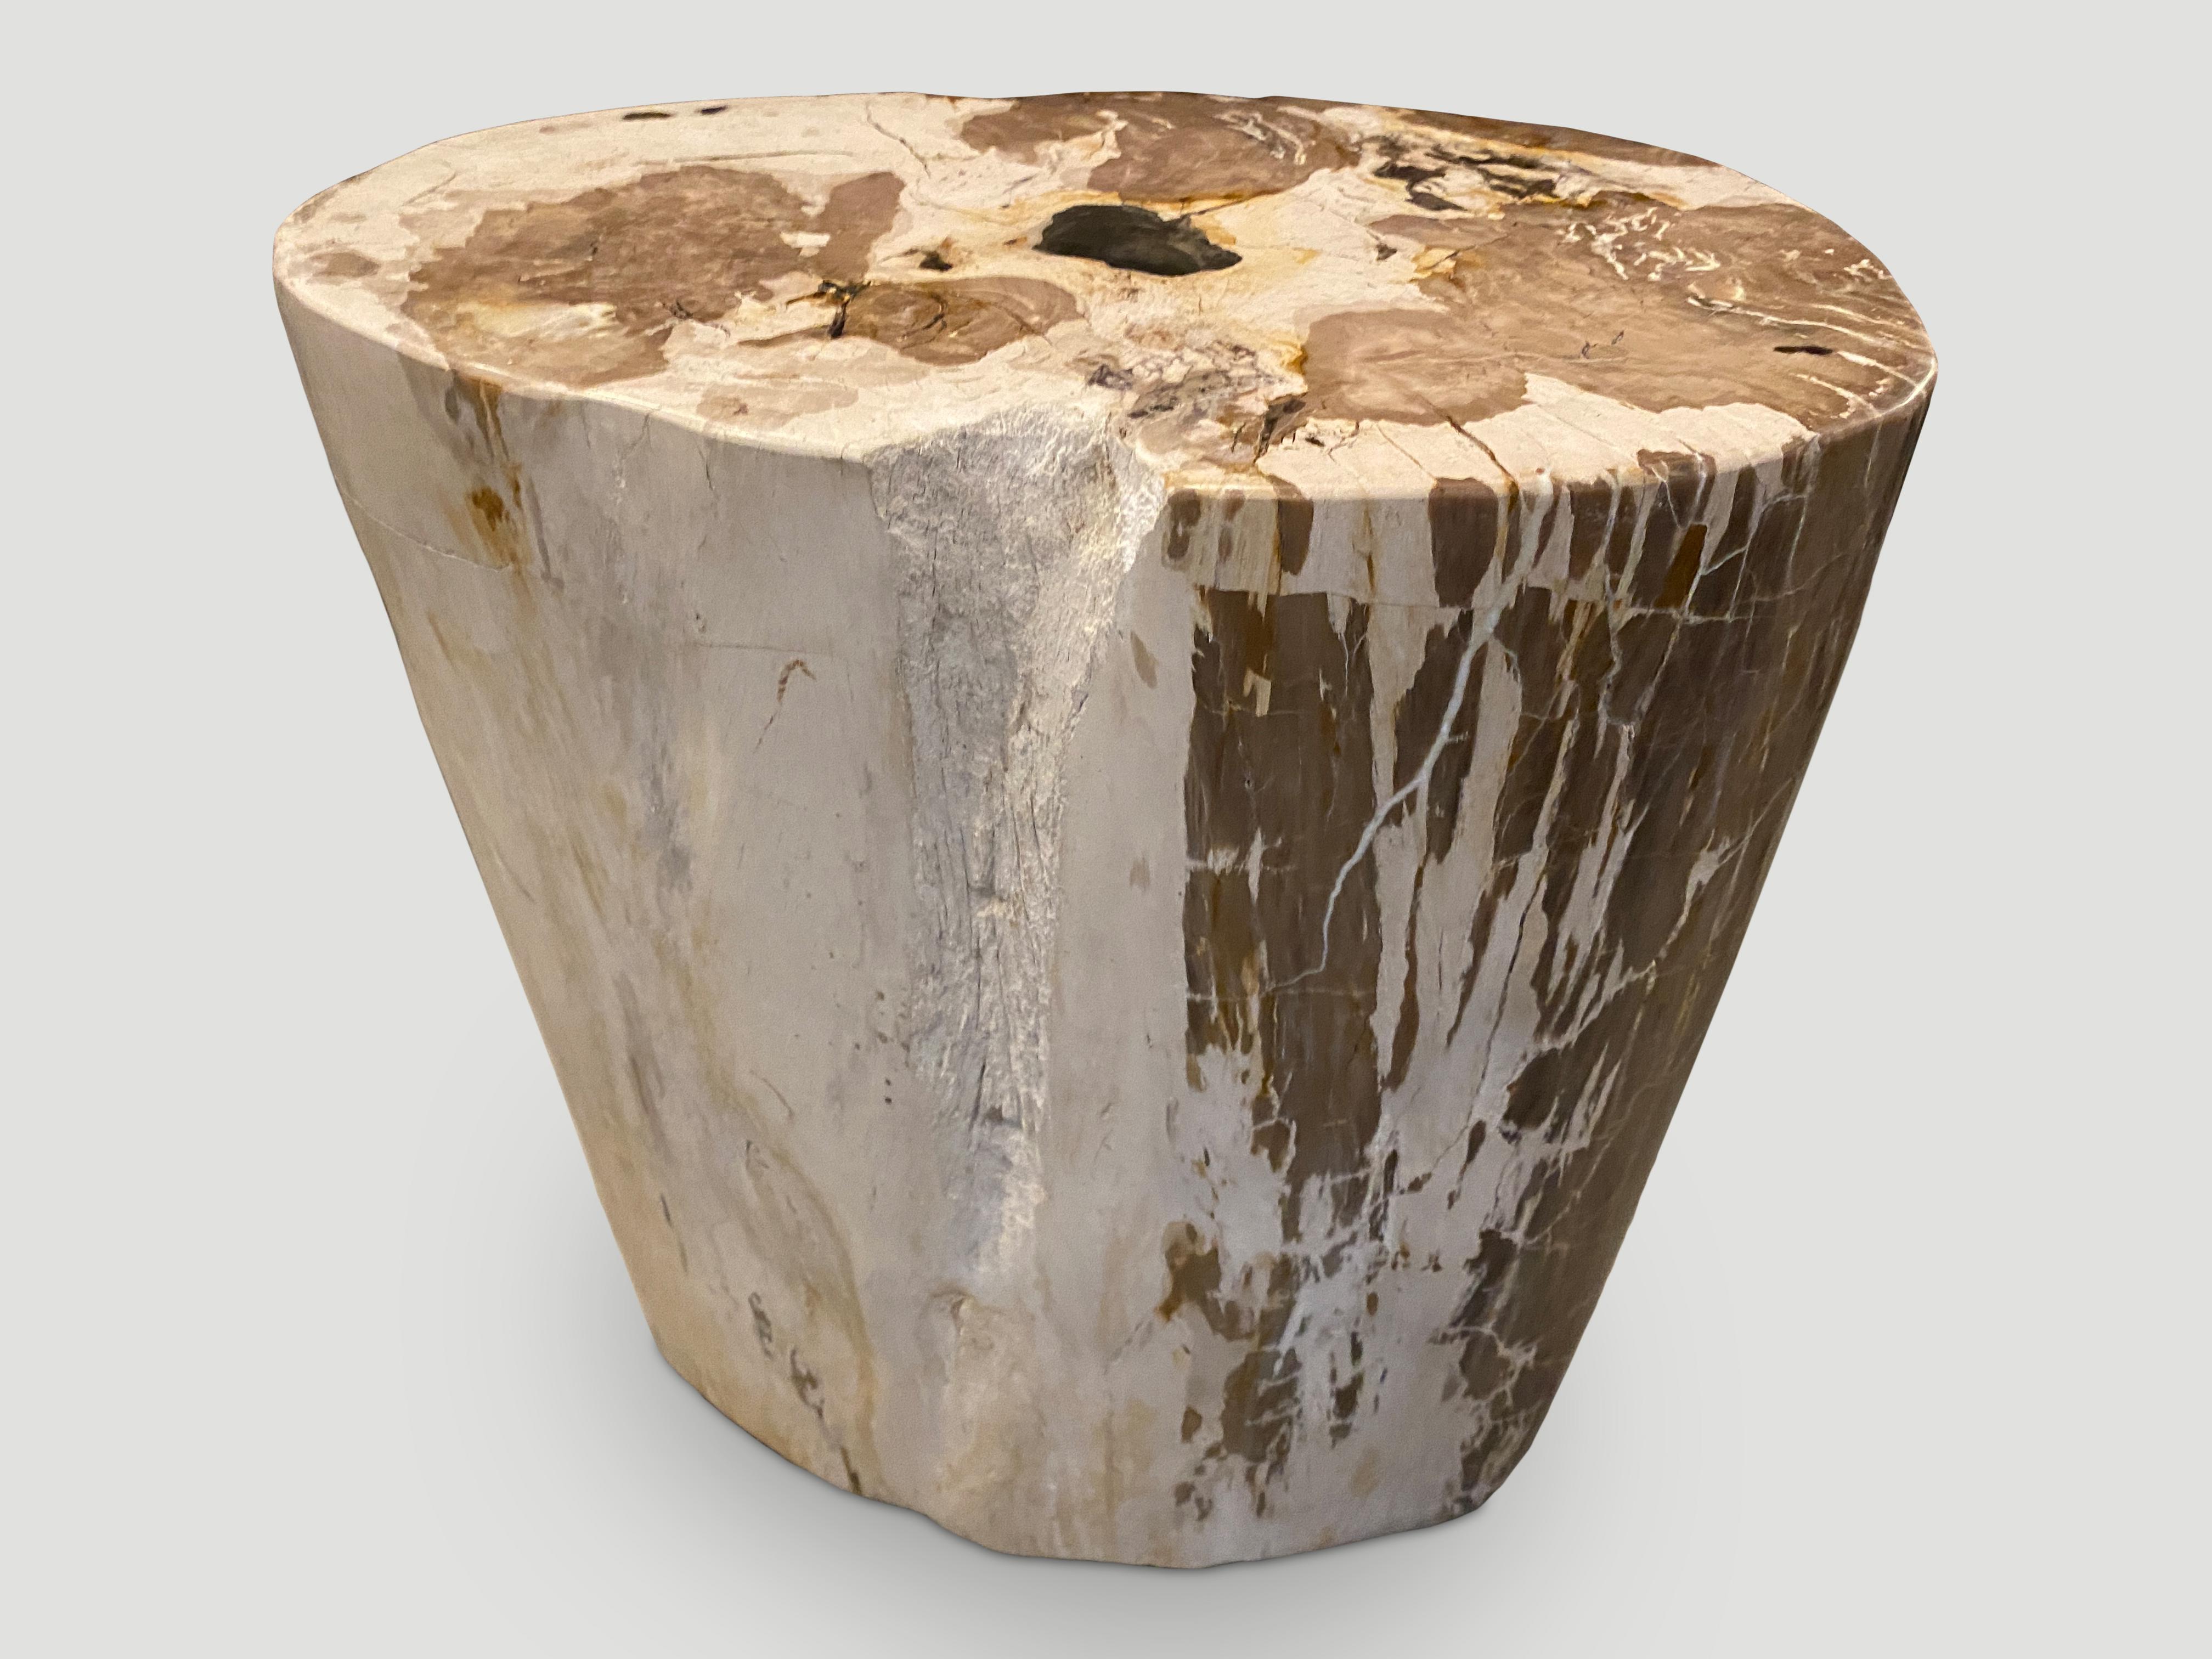 Impressive beautiful contrasting tones and textures in this ancient petrified wood side table. It’s fascinating how Mother Nature produces these exquisite 40 million year old petrified teak logs with such contrasting colors and natural patterns